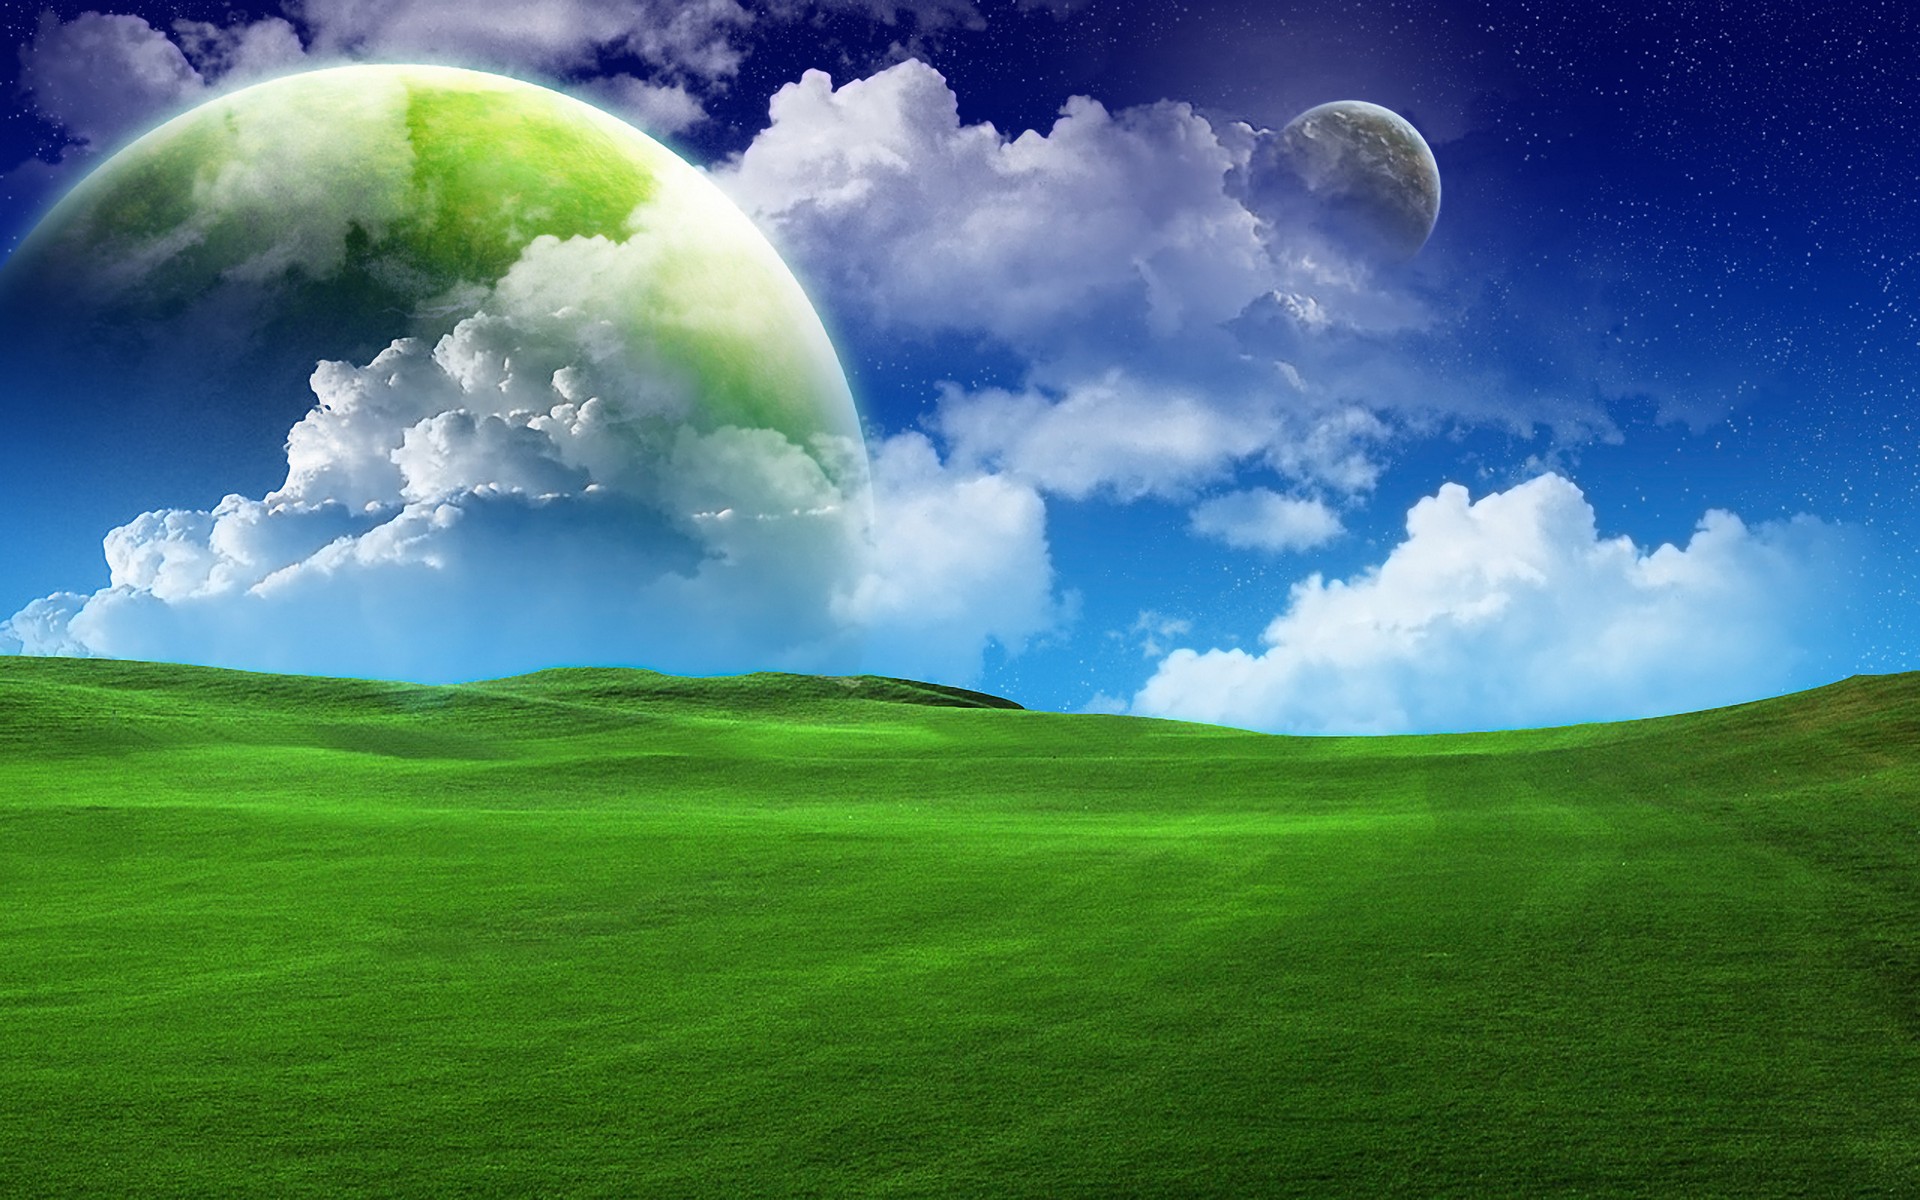 Green field under a starry sky with clouds, showcasing a planet in the vastness of space.